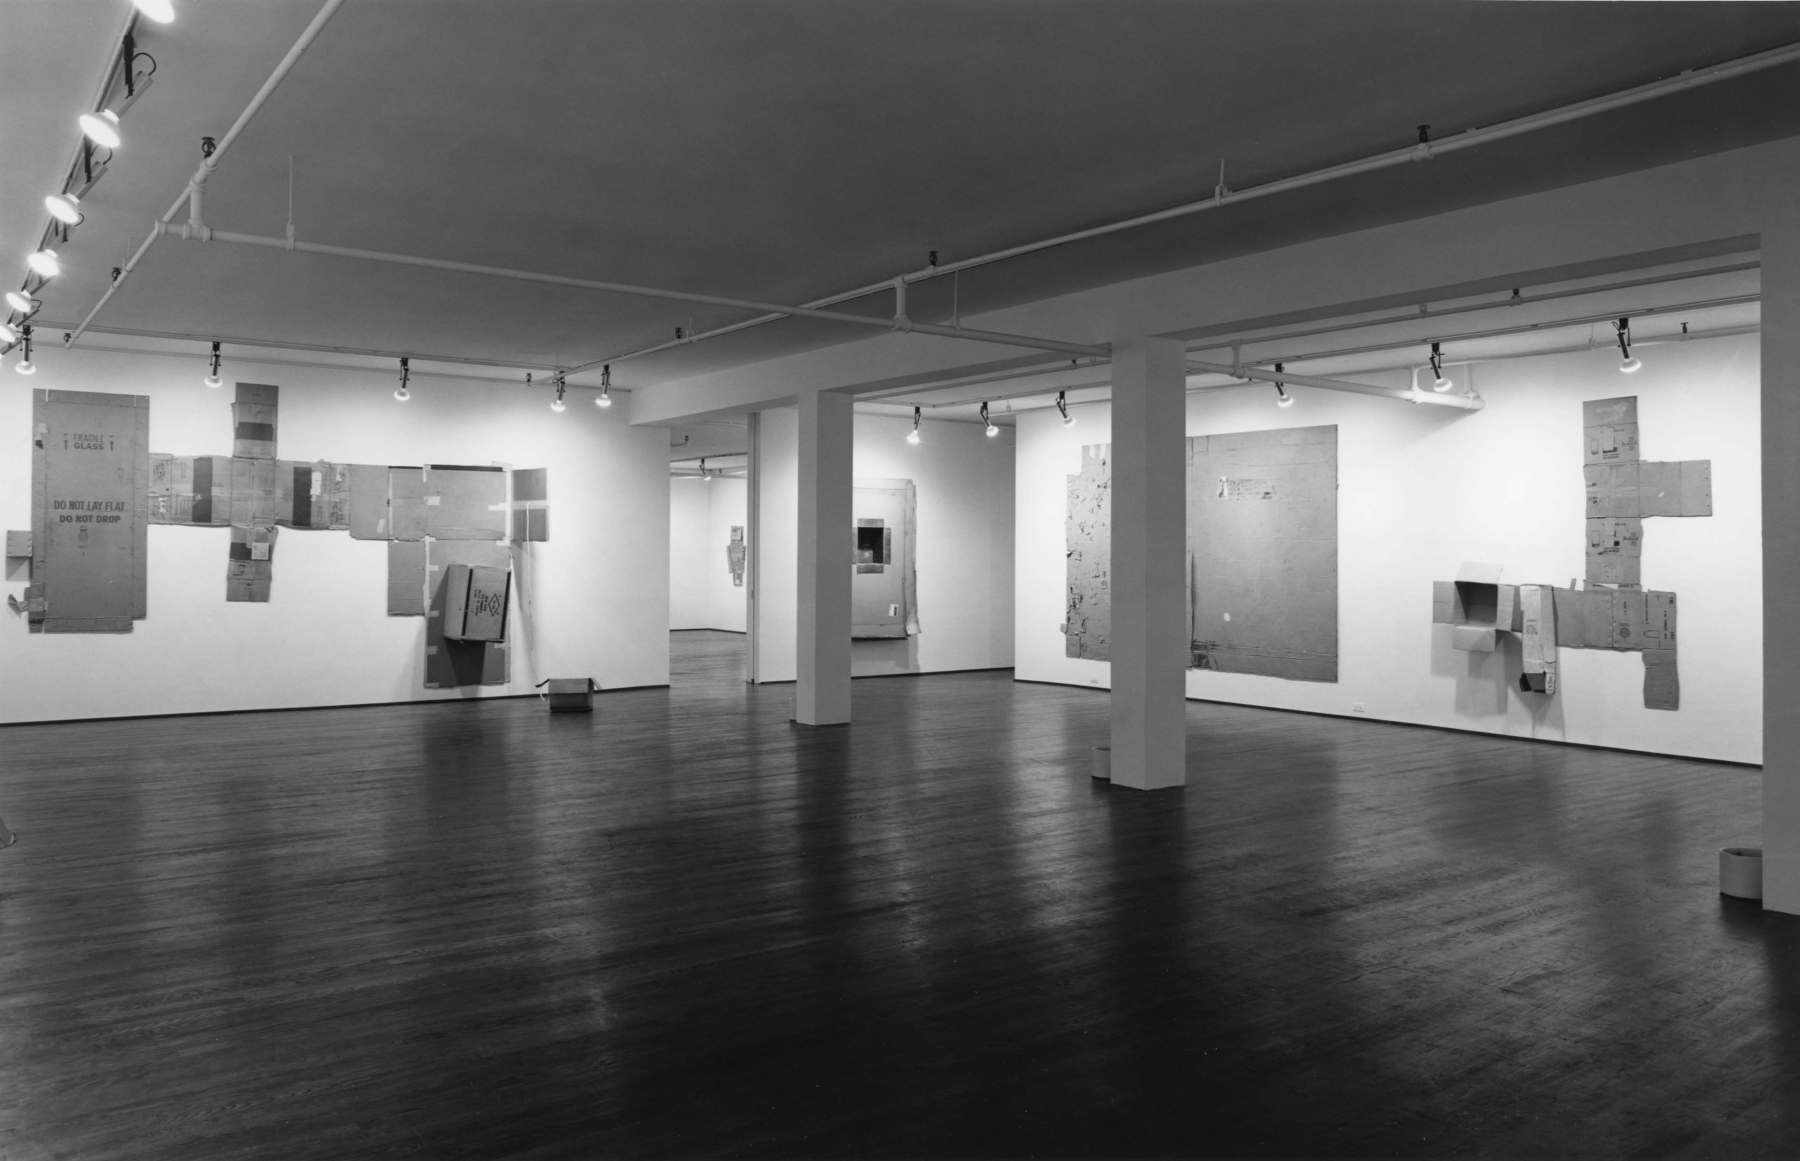 Installation view of Robert Rauschenberg: Cardboards, at Leo Castelli, New York, 1971, with Castelli / Small Turtle Bowl (Cardboards) (1971) second from right (pages 24-25). Image Castelli Gallery, New York. Photo by Geoffrey Clements.&nbsp;